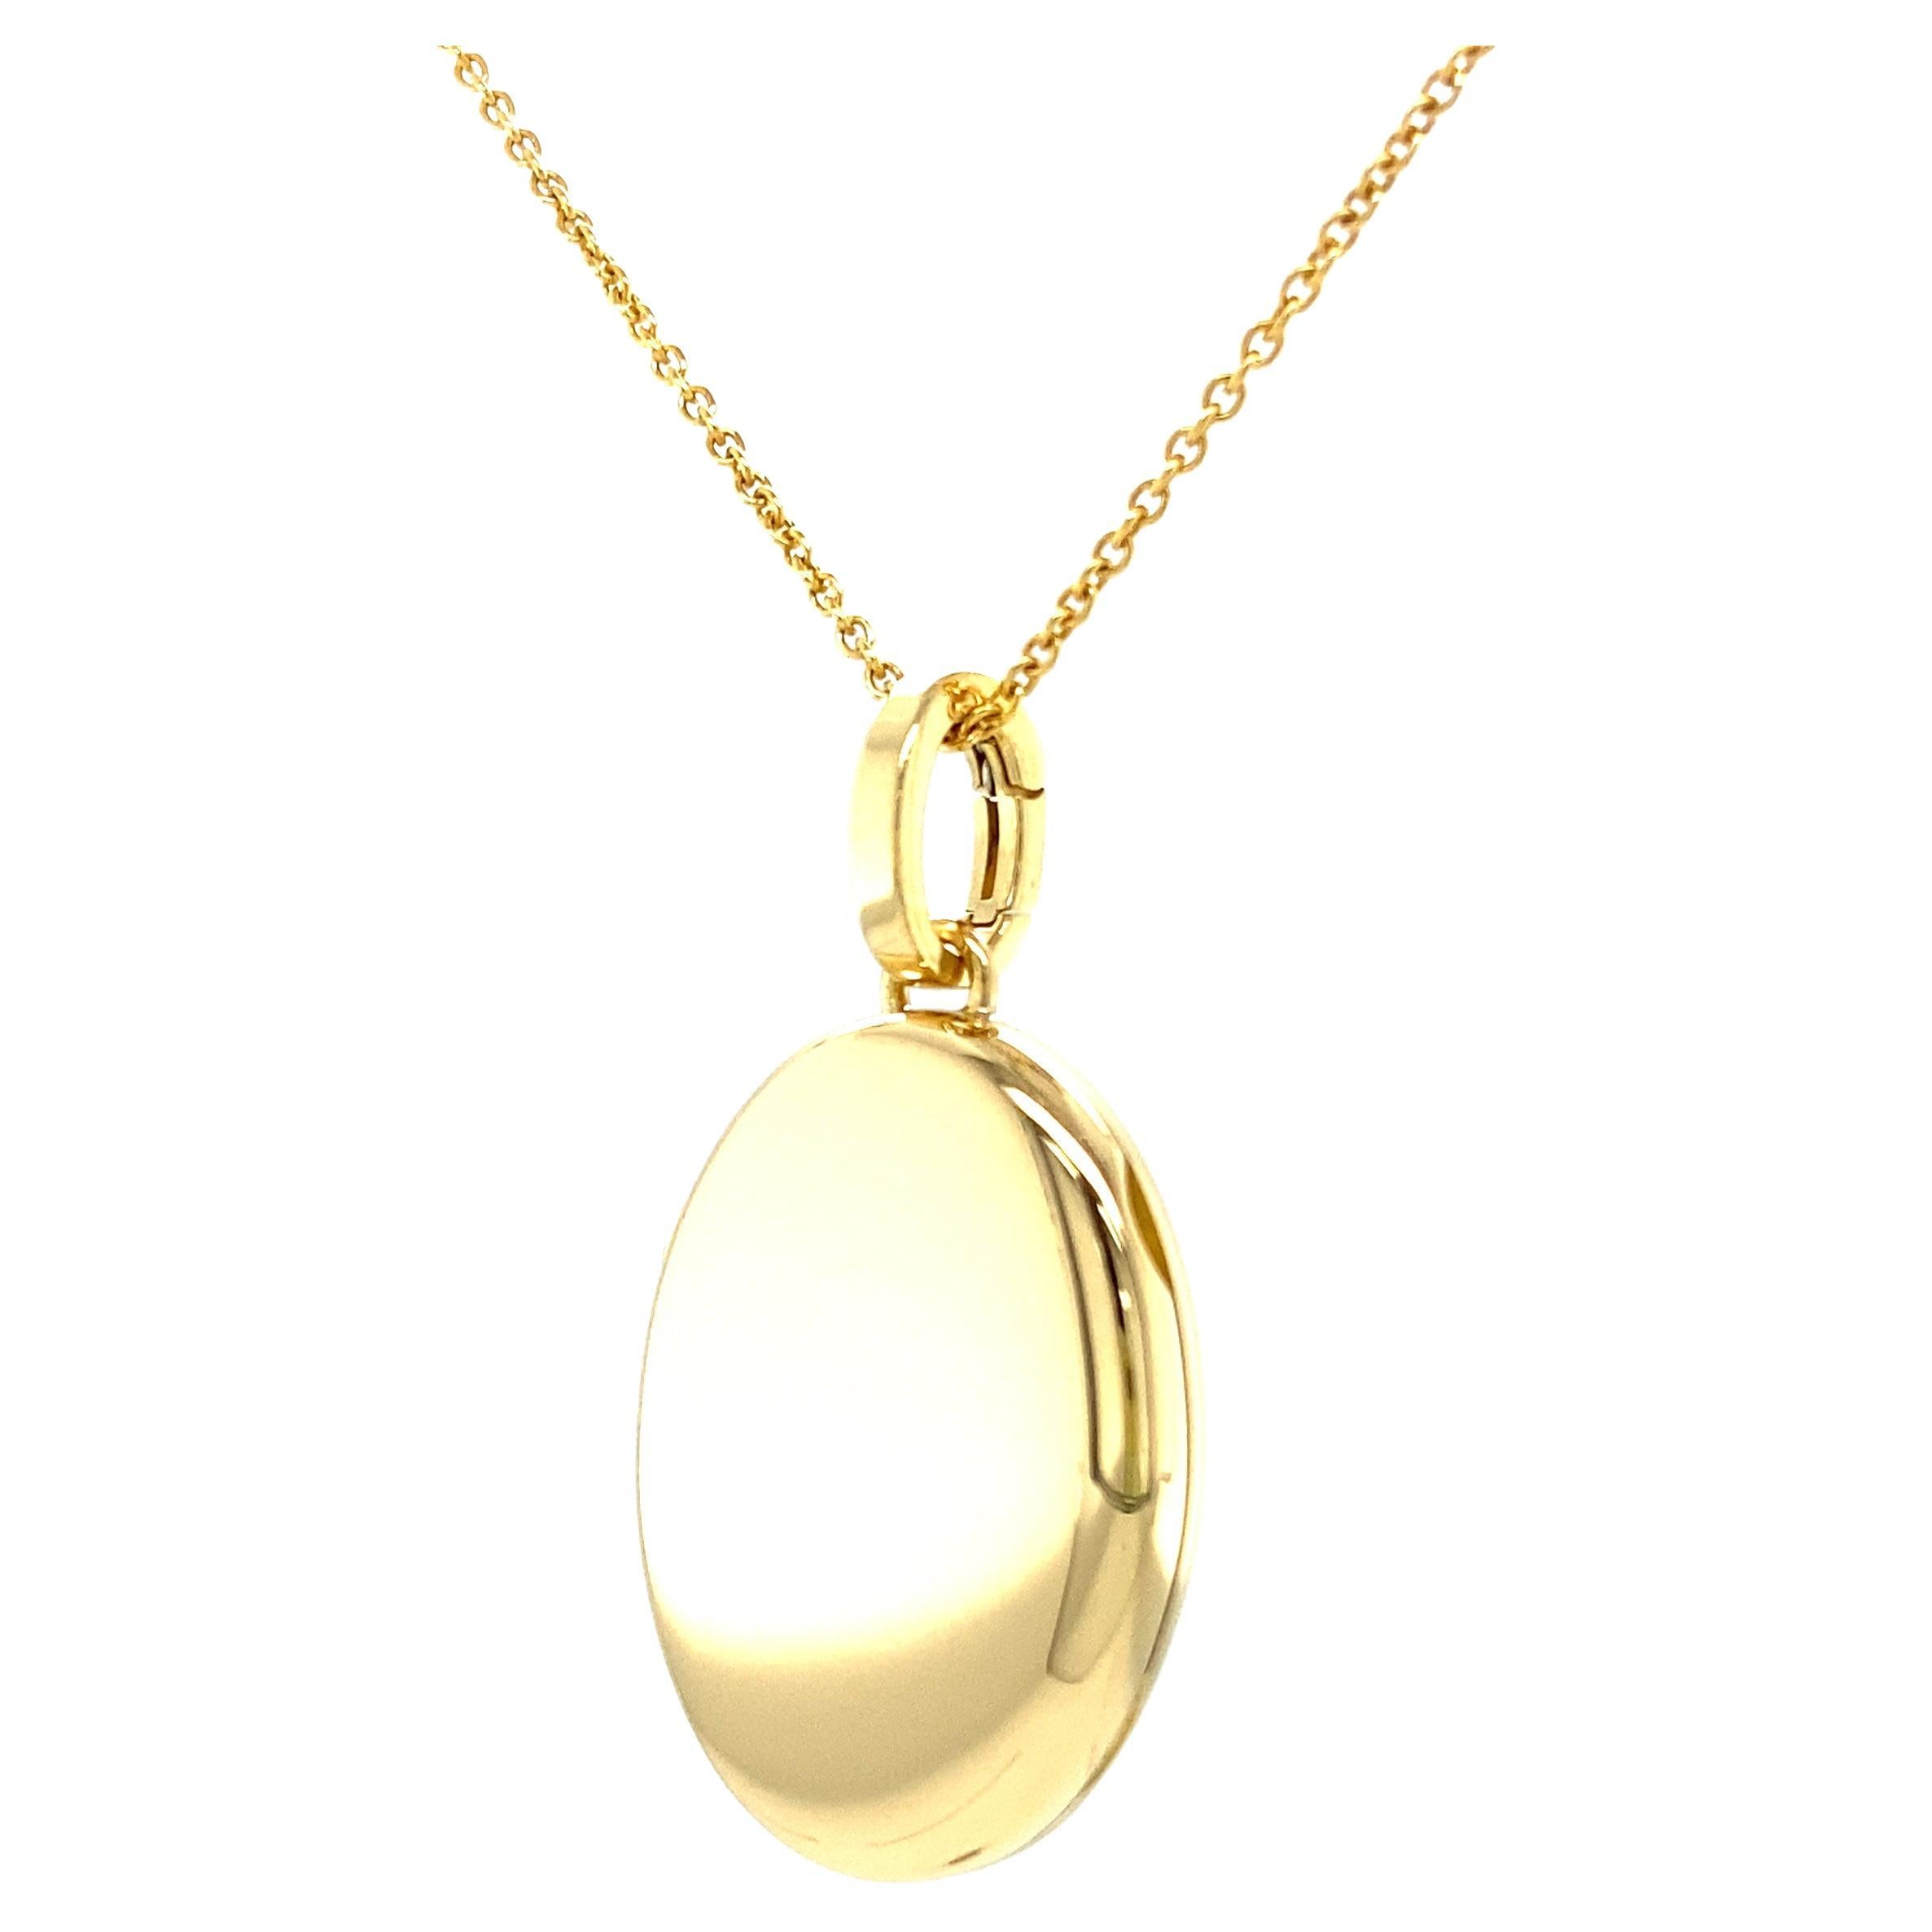 Oval Polished Locket Pendant Necklace - 18k Yellow Gold - 17 mm x 27 mm For Sale